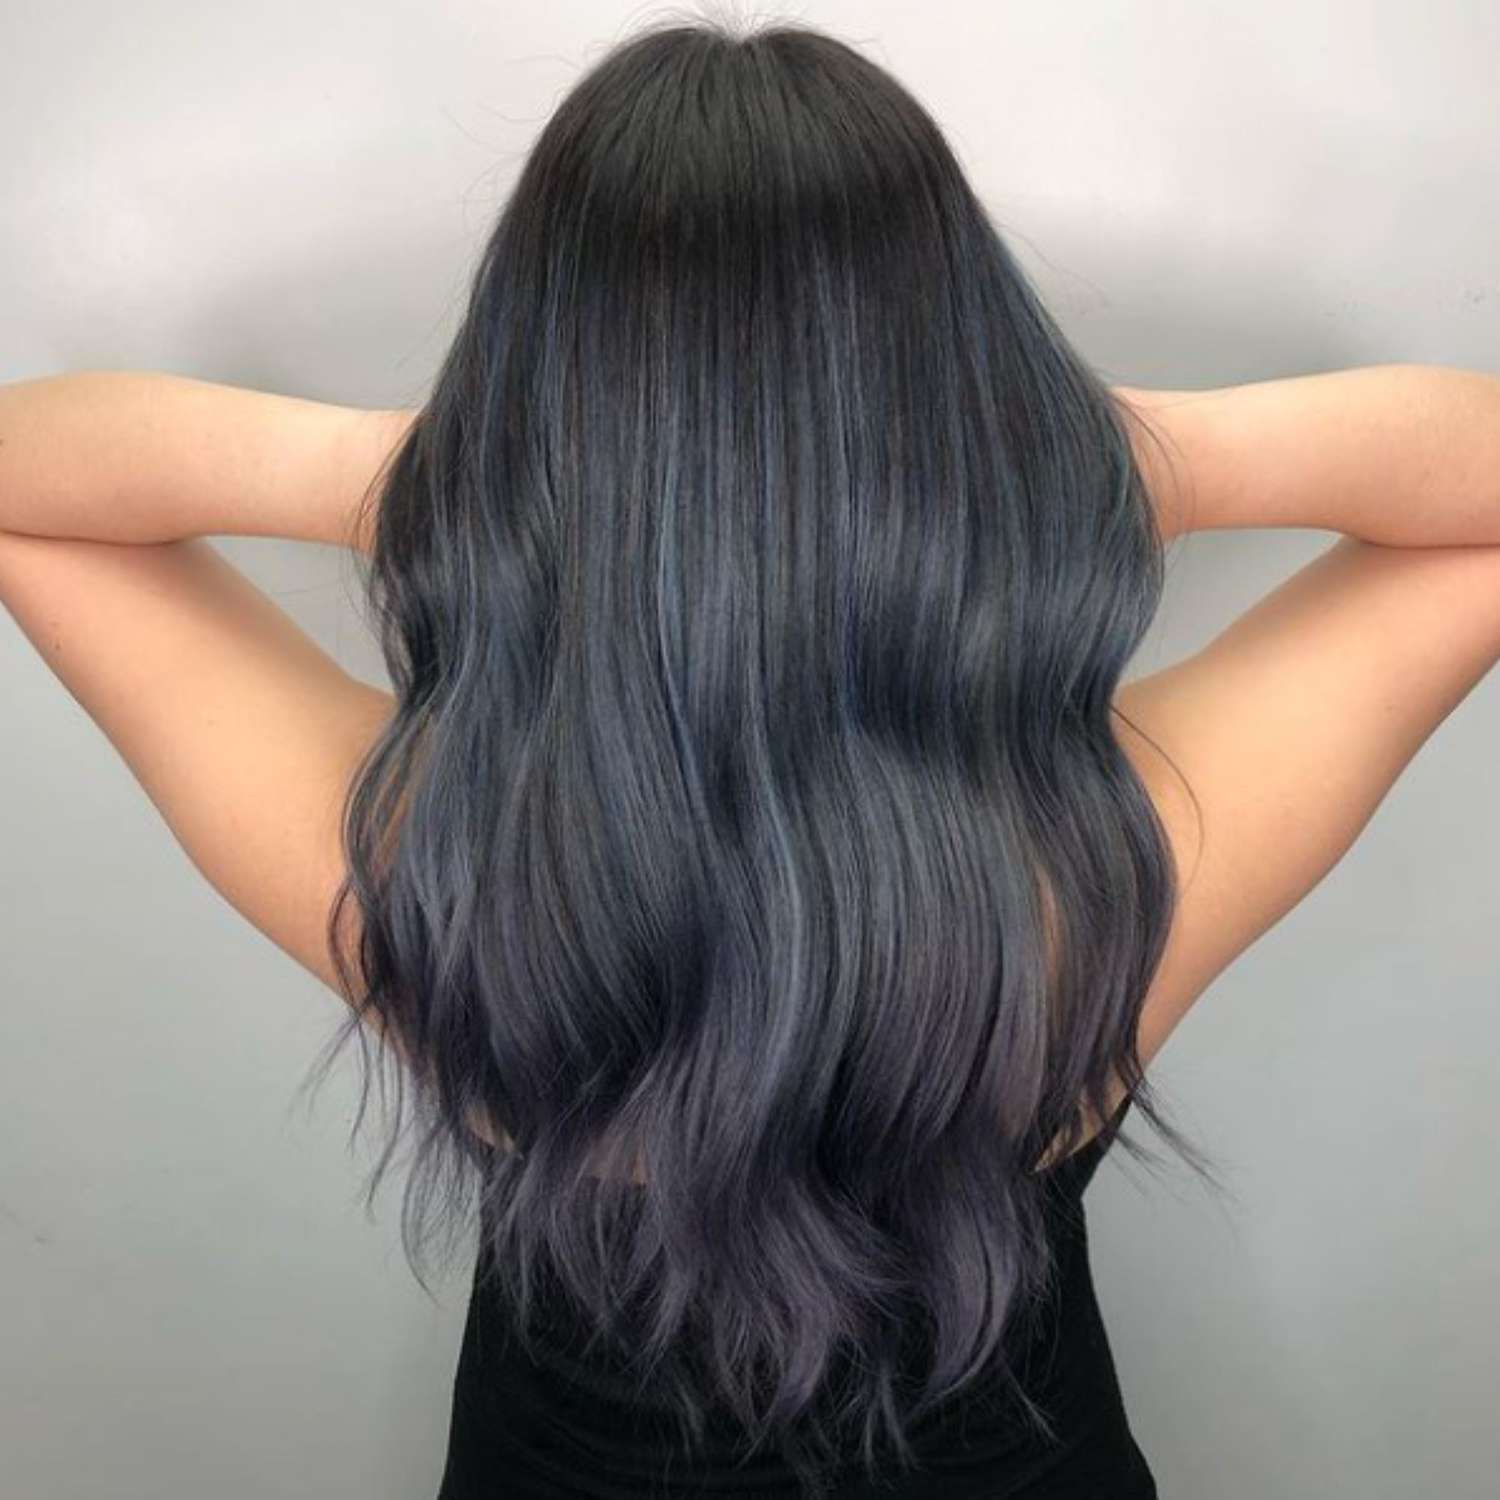 Black hair with blue ombre highlights